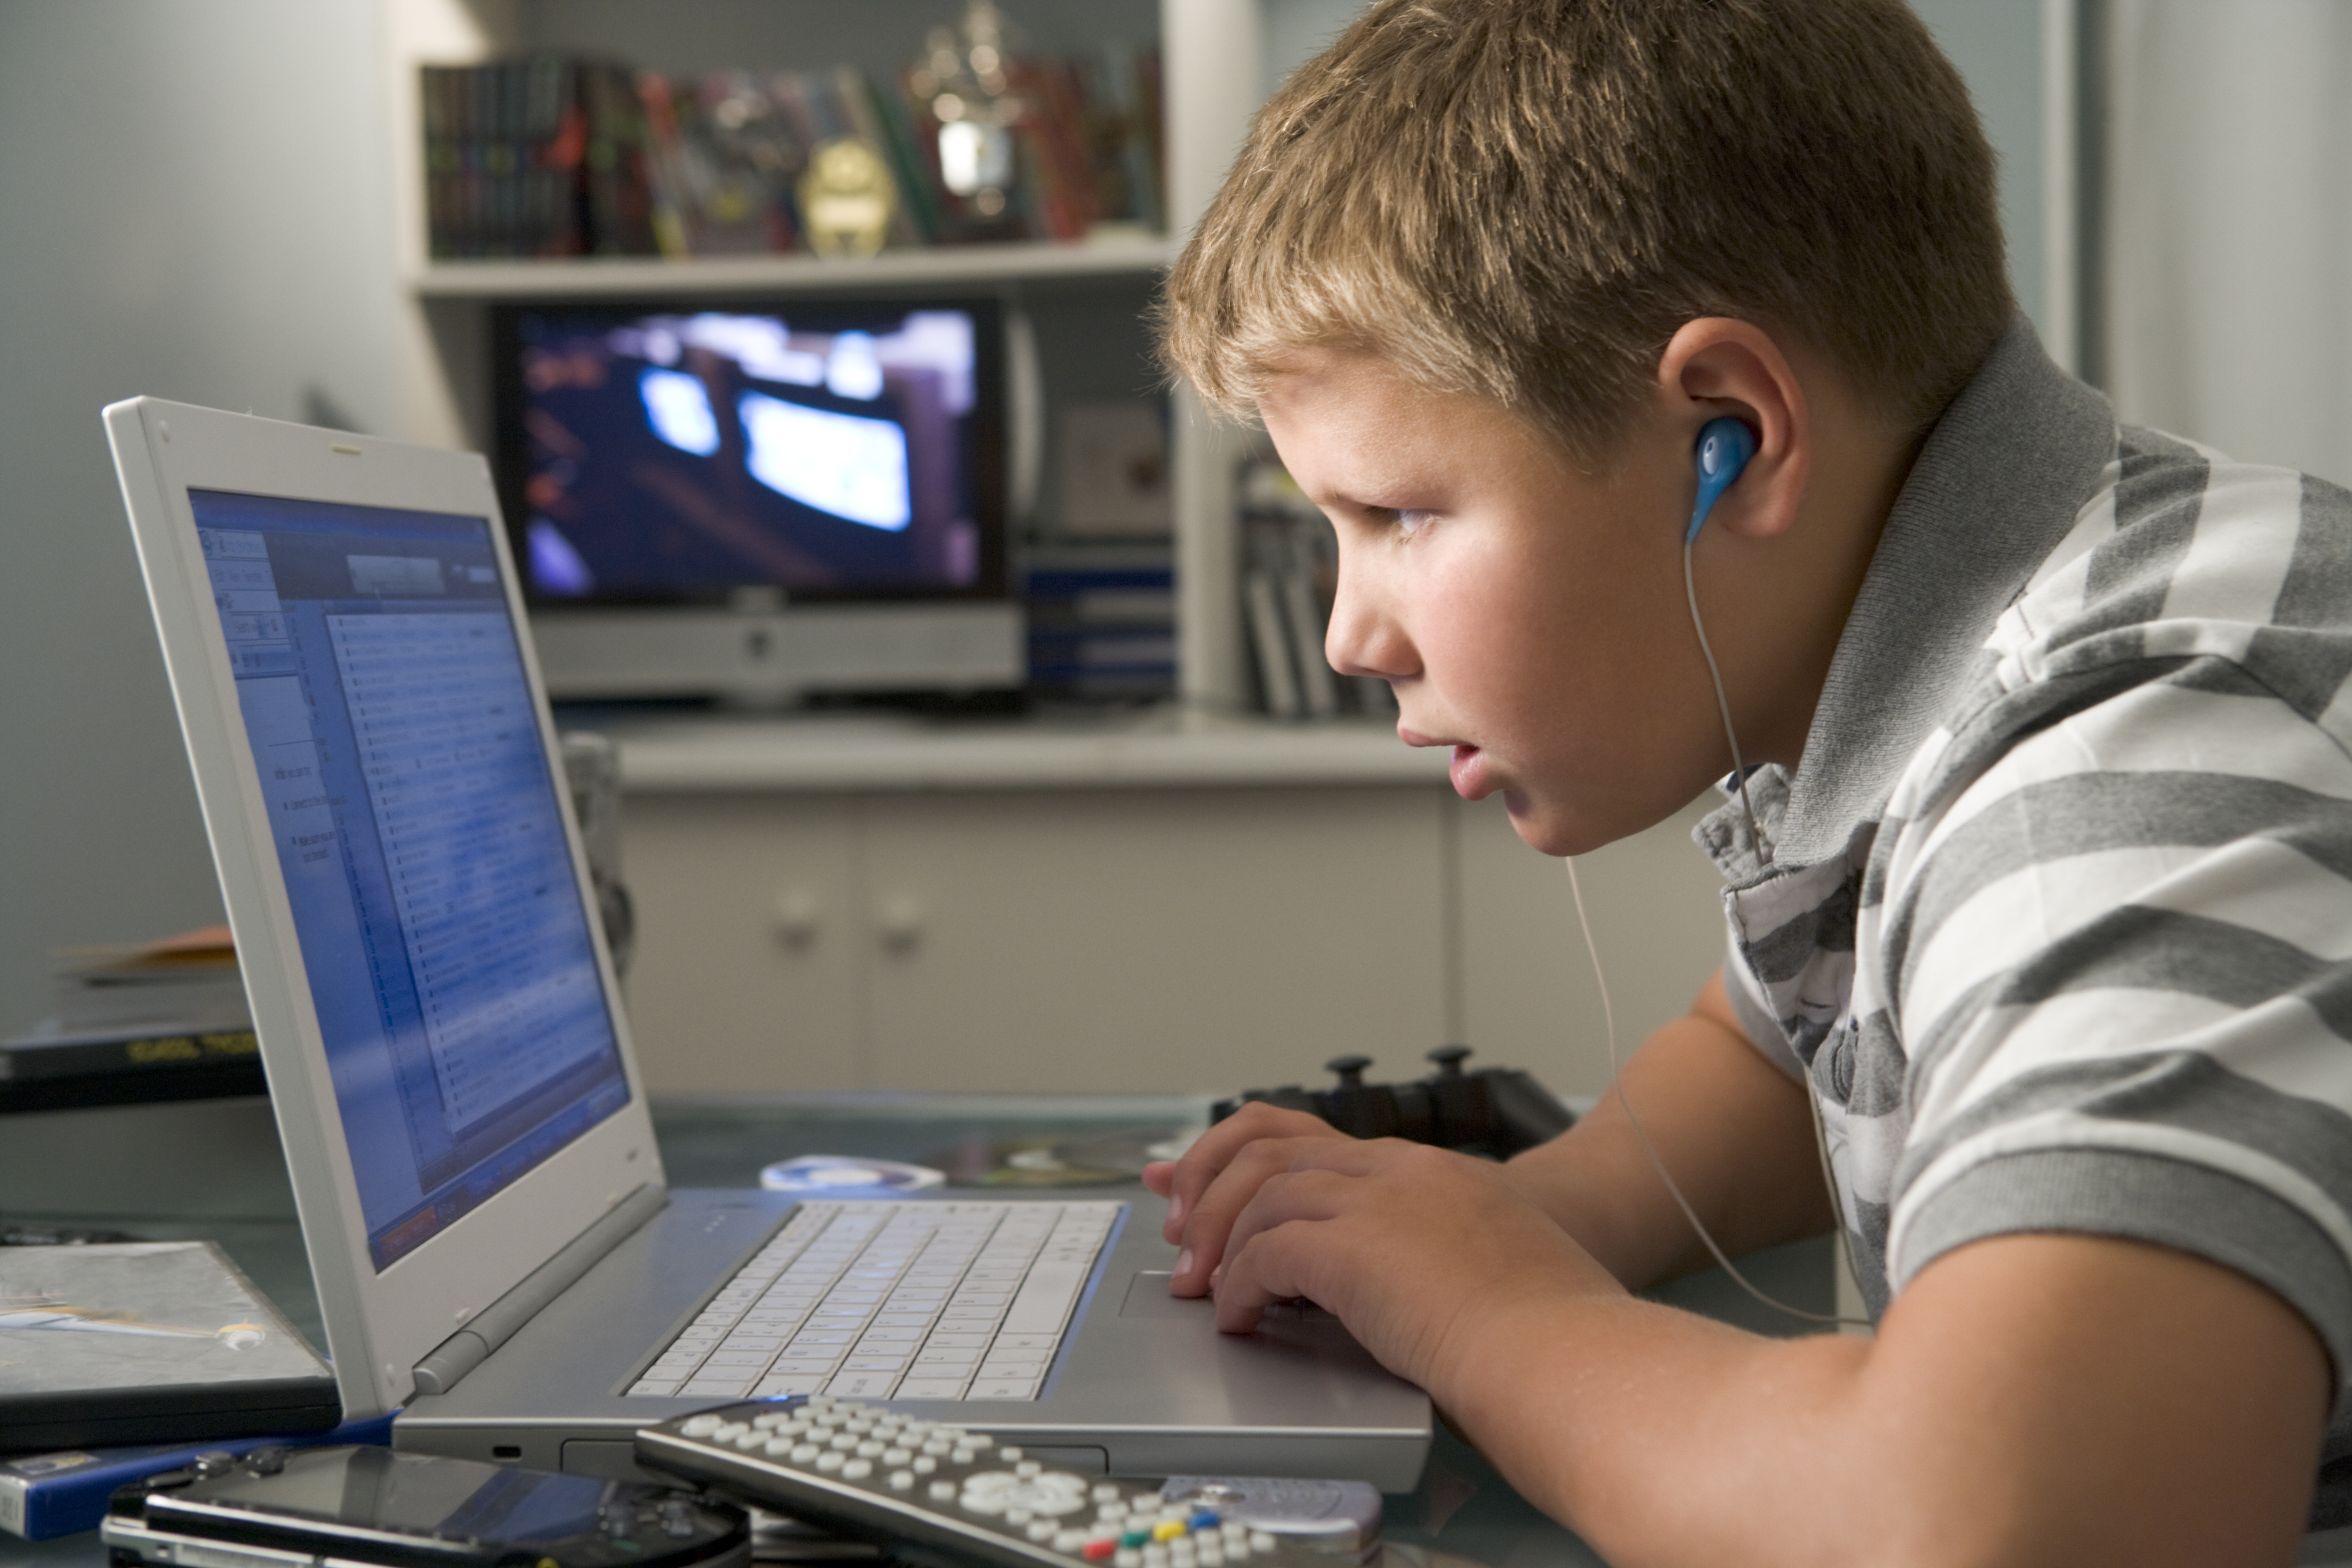 Young boy in bedroom using a laptop computer and listening to headphones